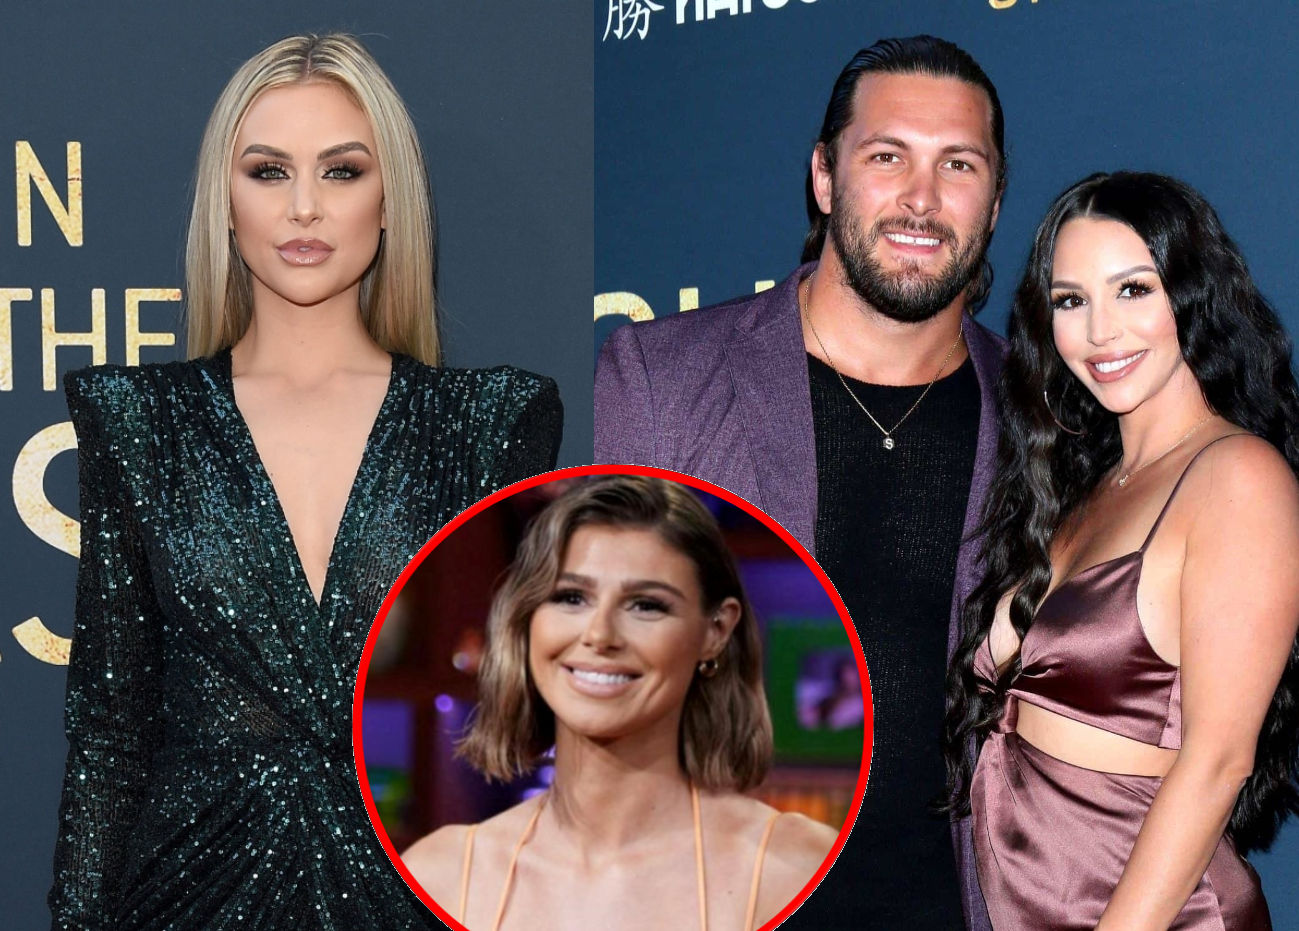 Lala Kent Denies Stealing Home From Brock, Reveals Ariana's Reaction to Raquel Saying They "Weren't That Close," Plus Dog Drama and Raquel's Salary Demands